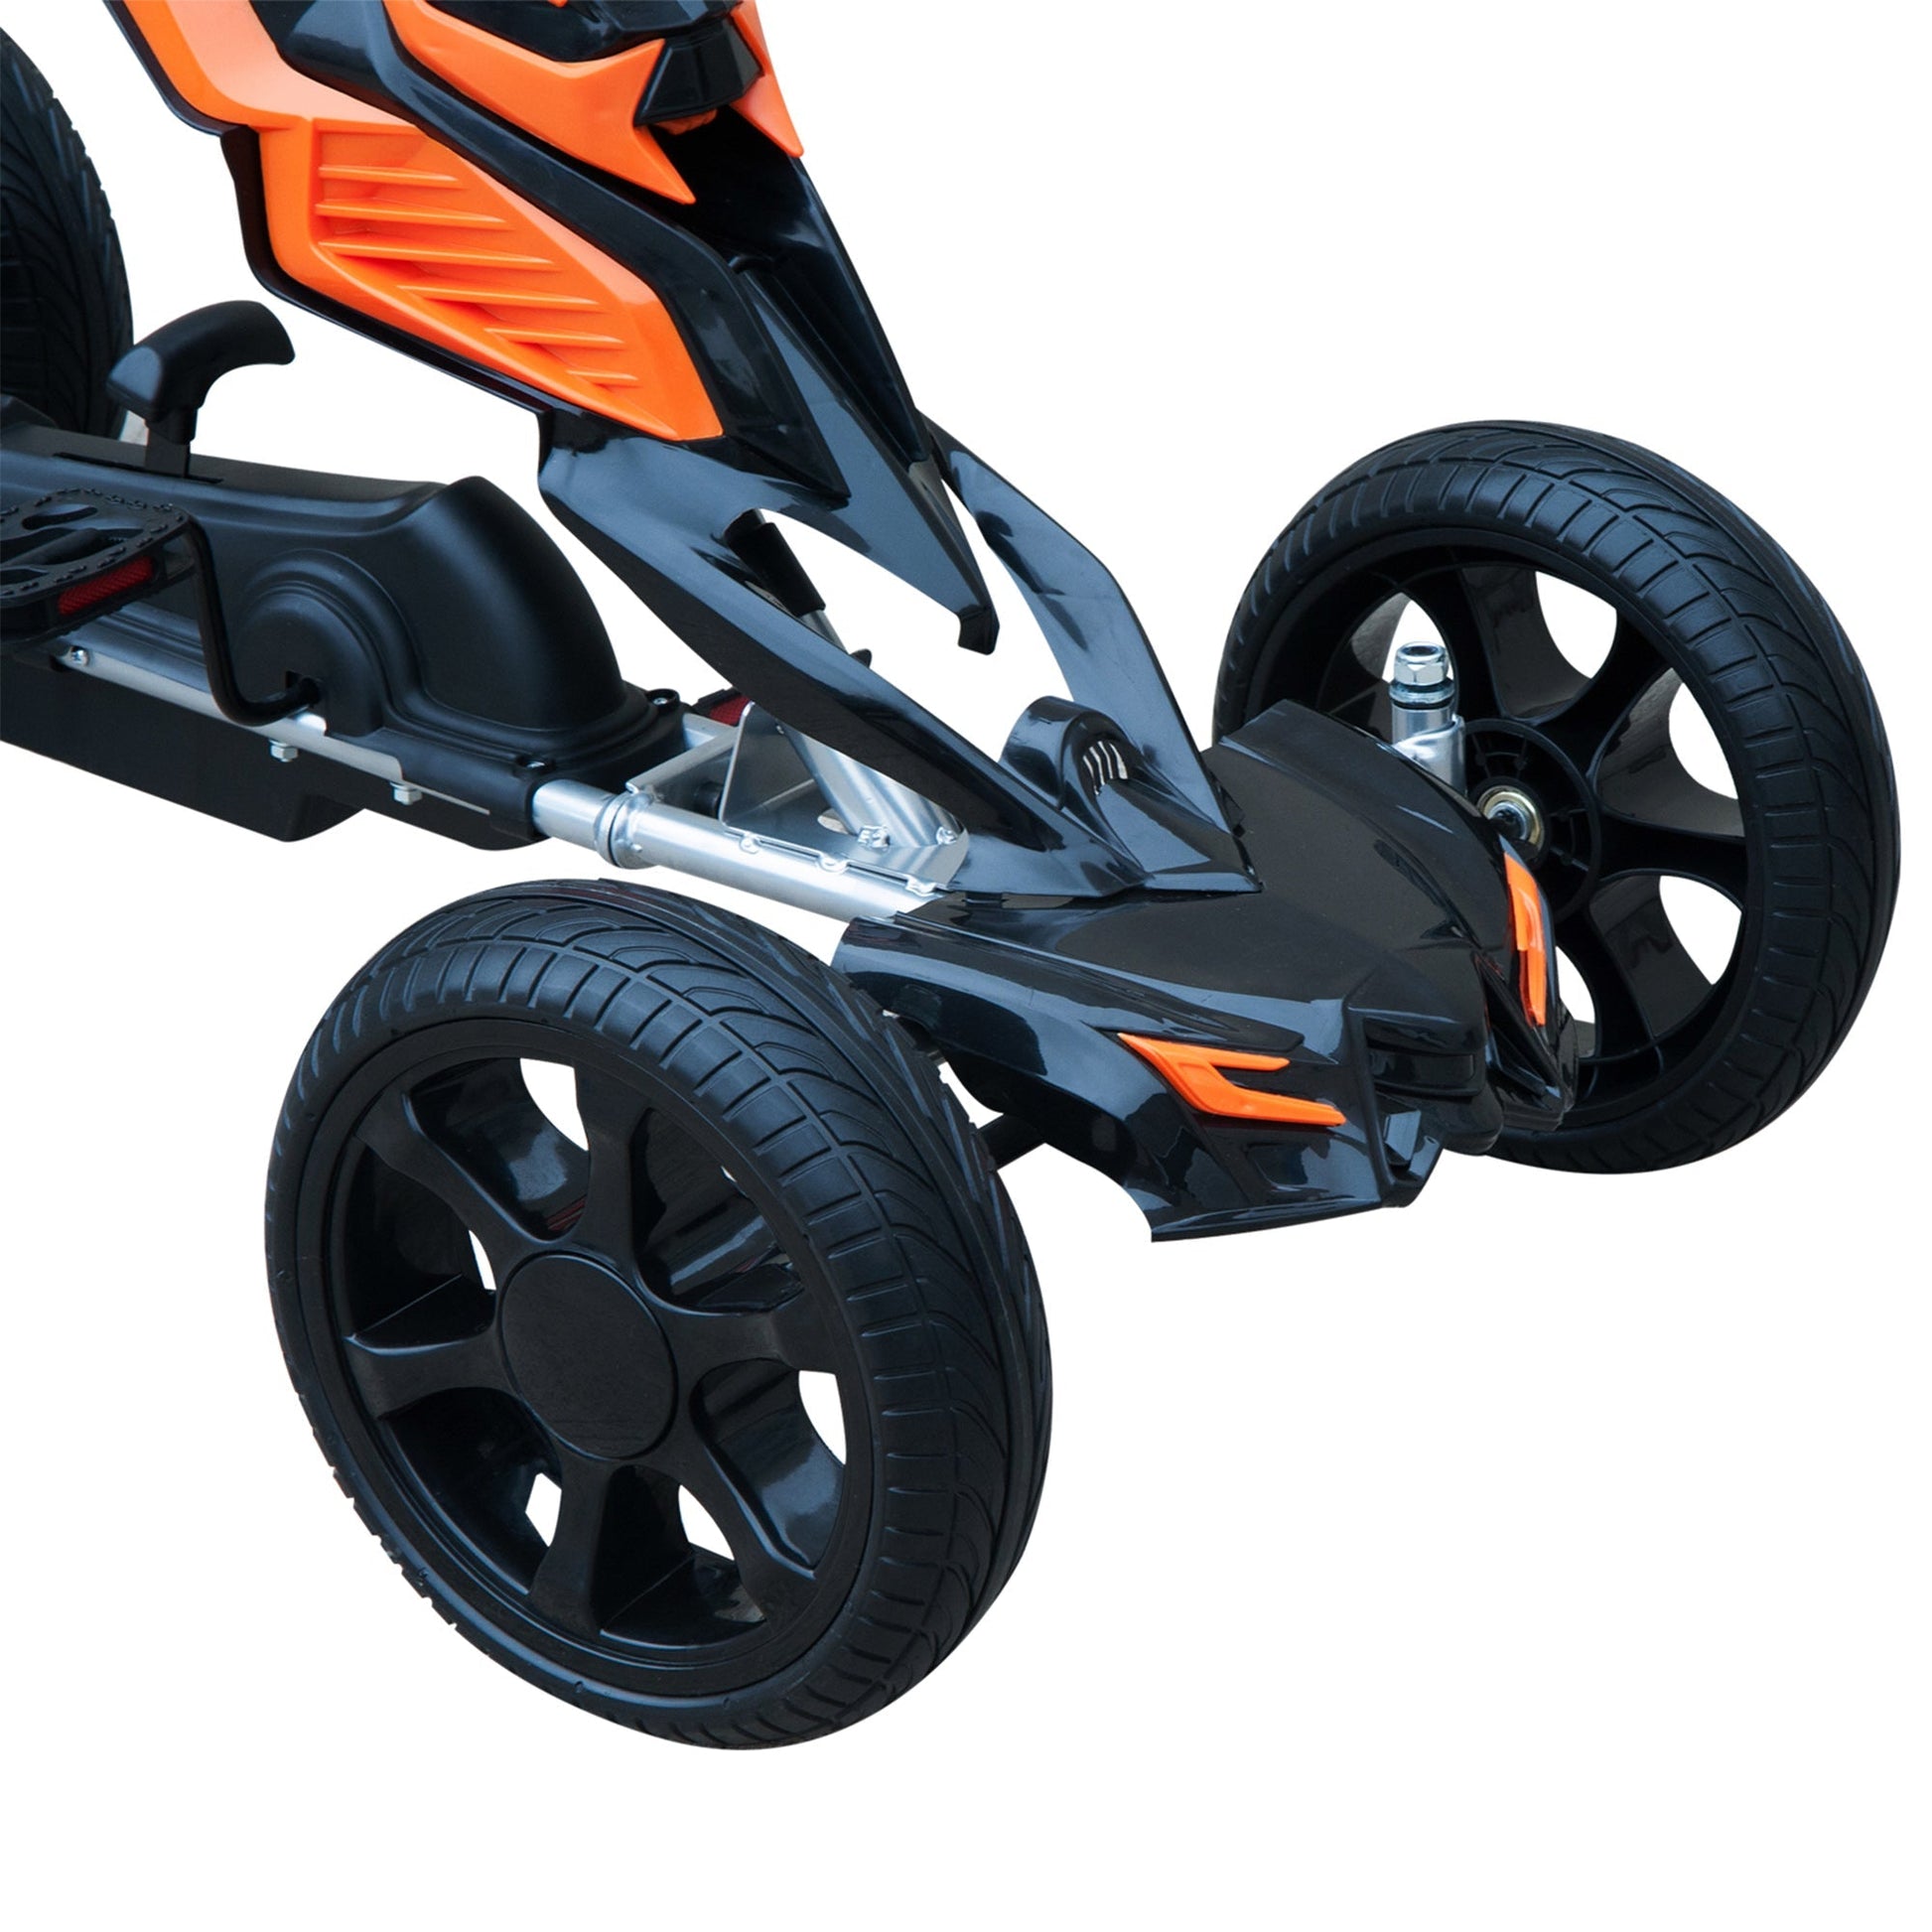 Kids Pedal Go Kart Children Toy Ride On Car Portable Kids Powered Kart for 5-12 Years Old at Gallery Canada